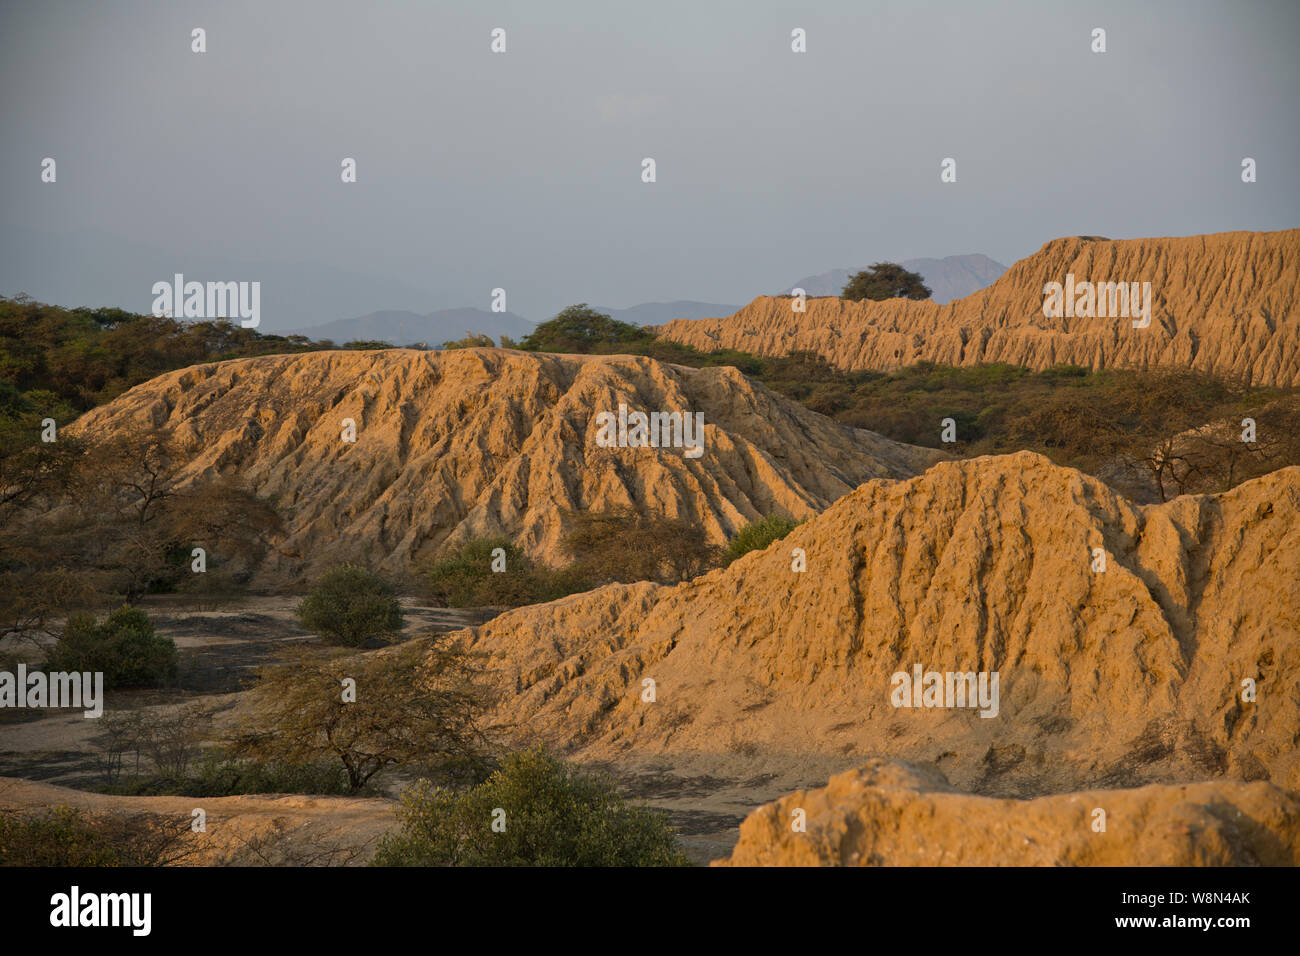 Burial Mounds,Treasures,Tombs,Pyramids,Erosion over Time,Moche Noblemen,Los Horcones de Tucume,Tecume,Northern Peru,Peru,South America Stock Photo